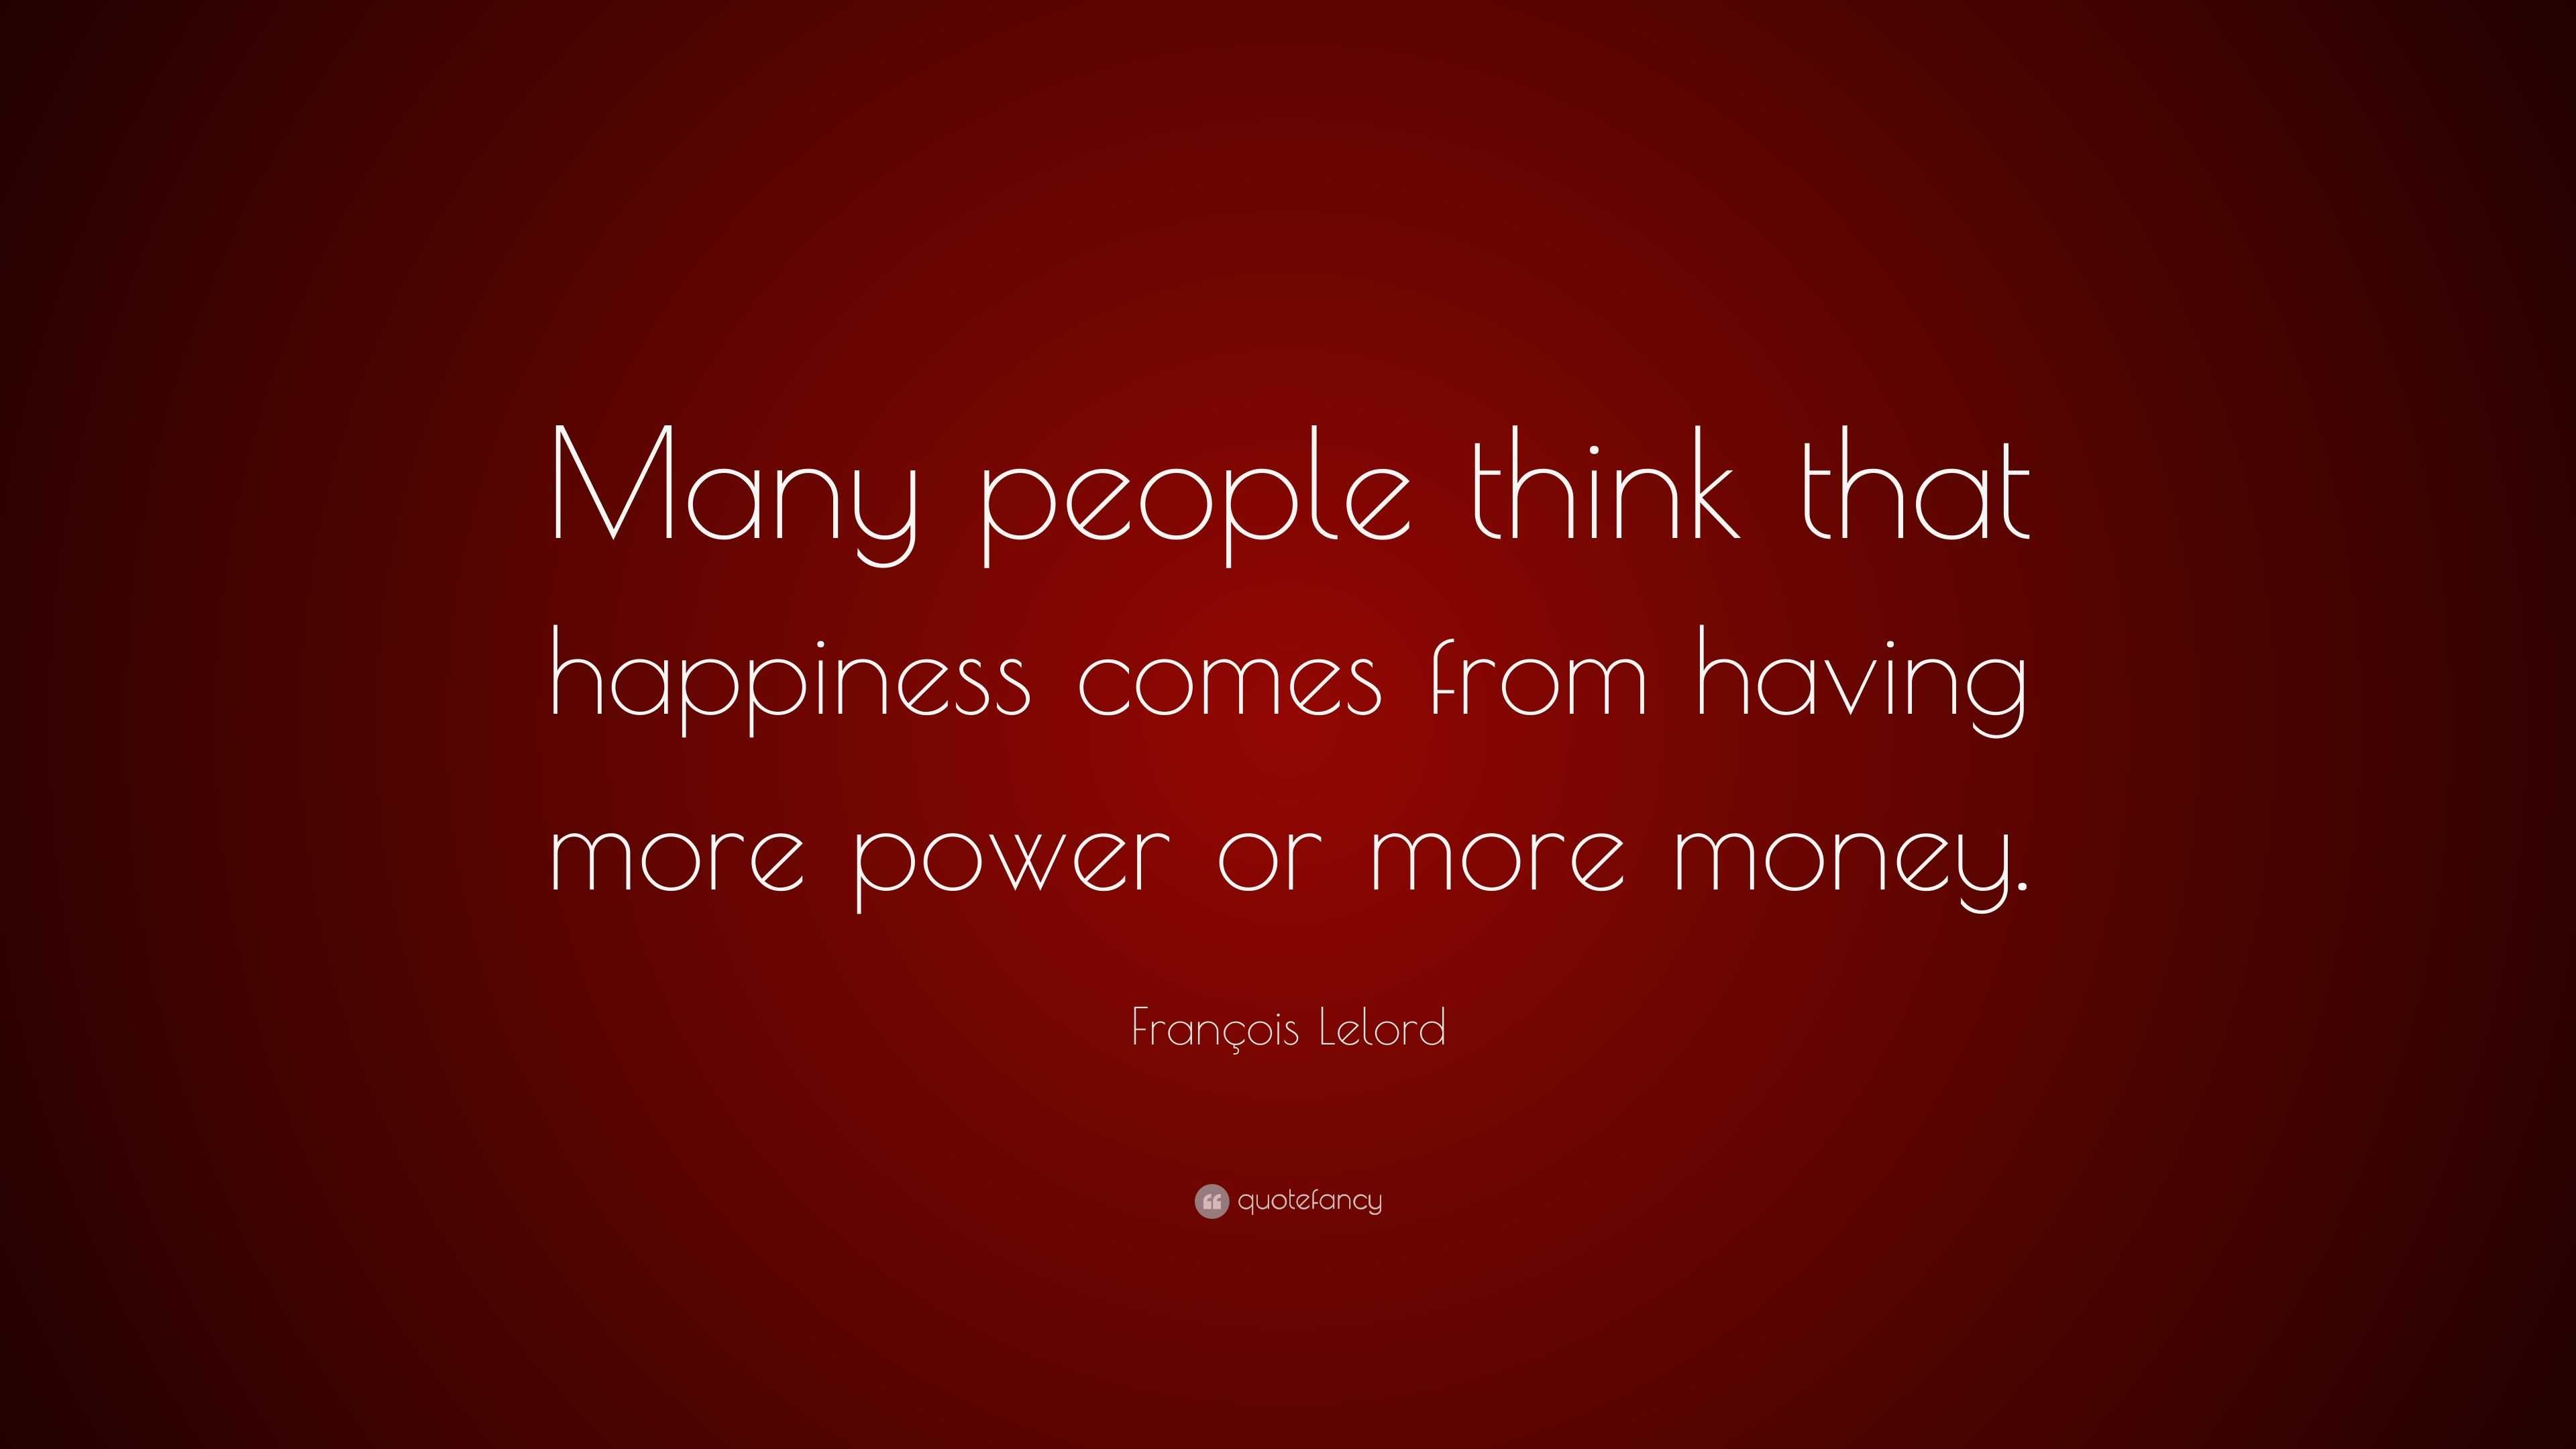 Francois Lelord Quote Many People Think That Happiness Comes From - francois lelord quote many p!   eople think that happiness comes from having more power or